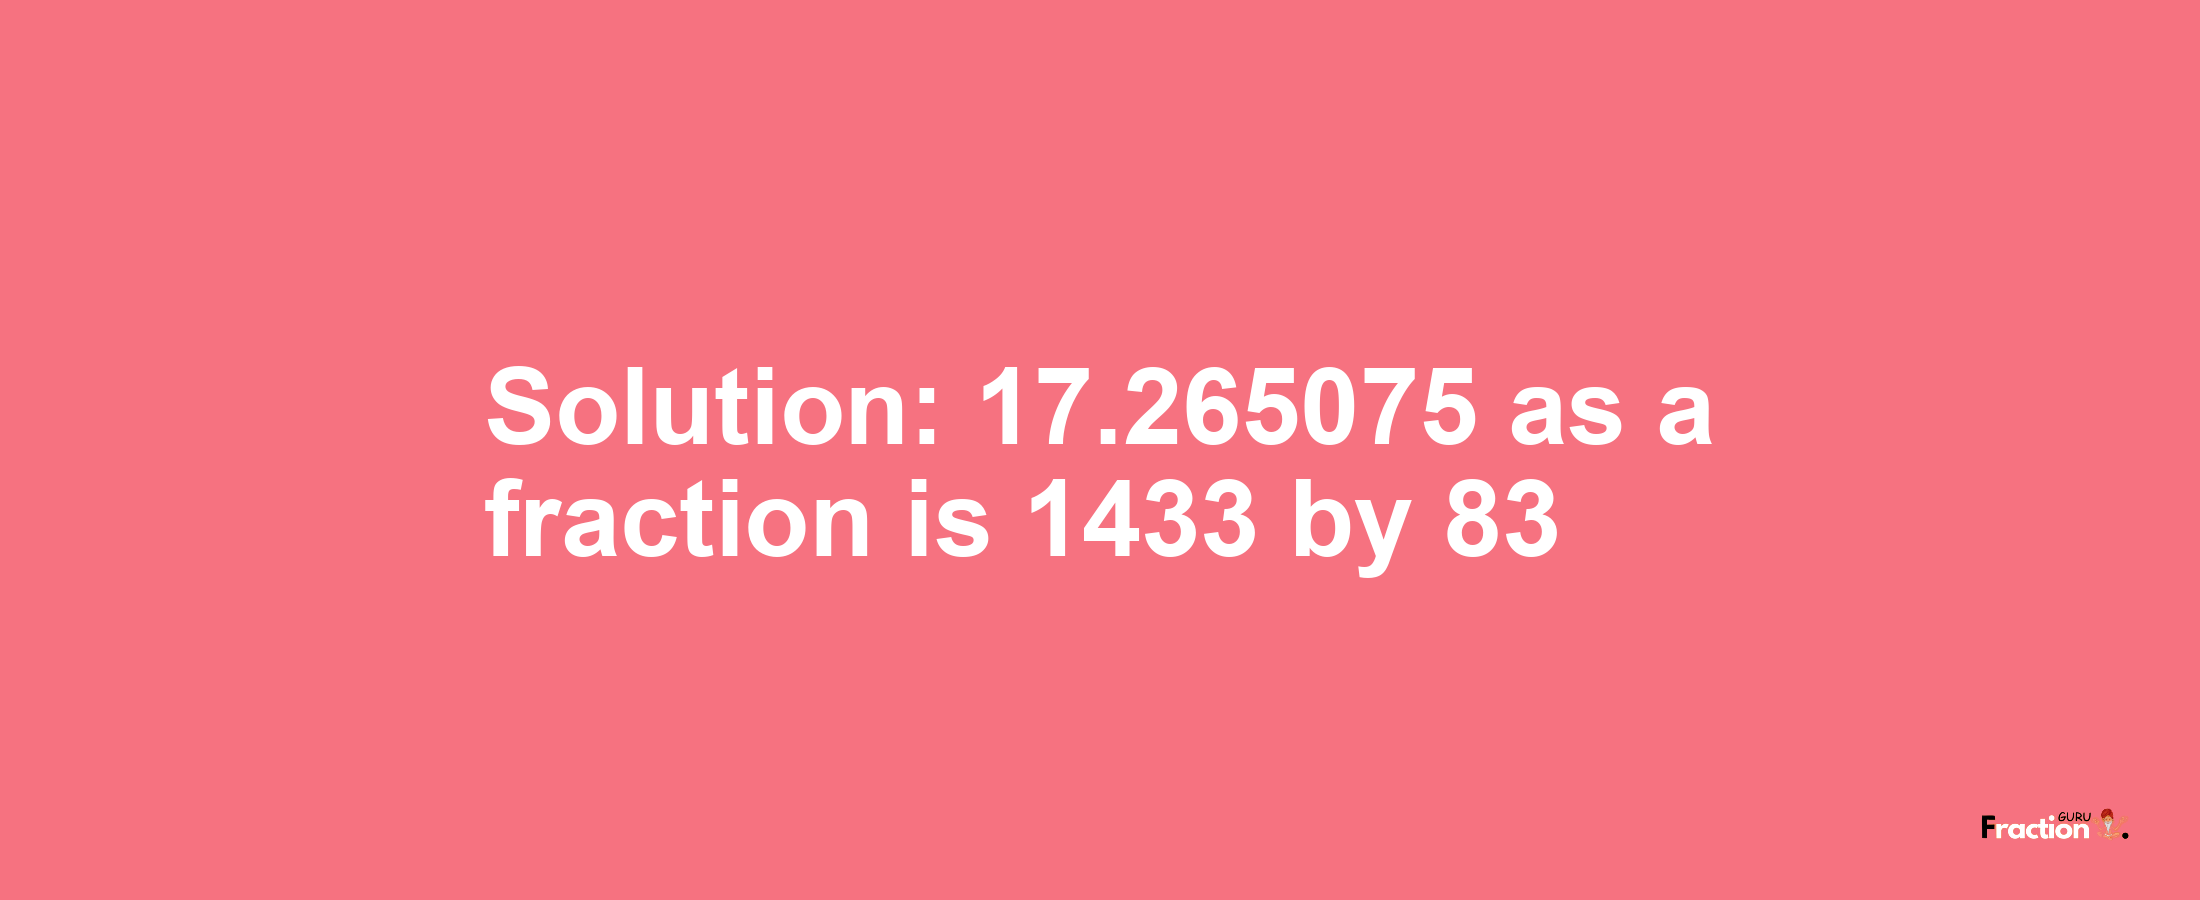 Solution:17.265075 as a fraction is 1433/83